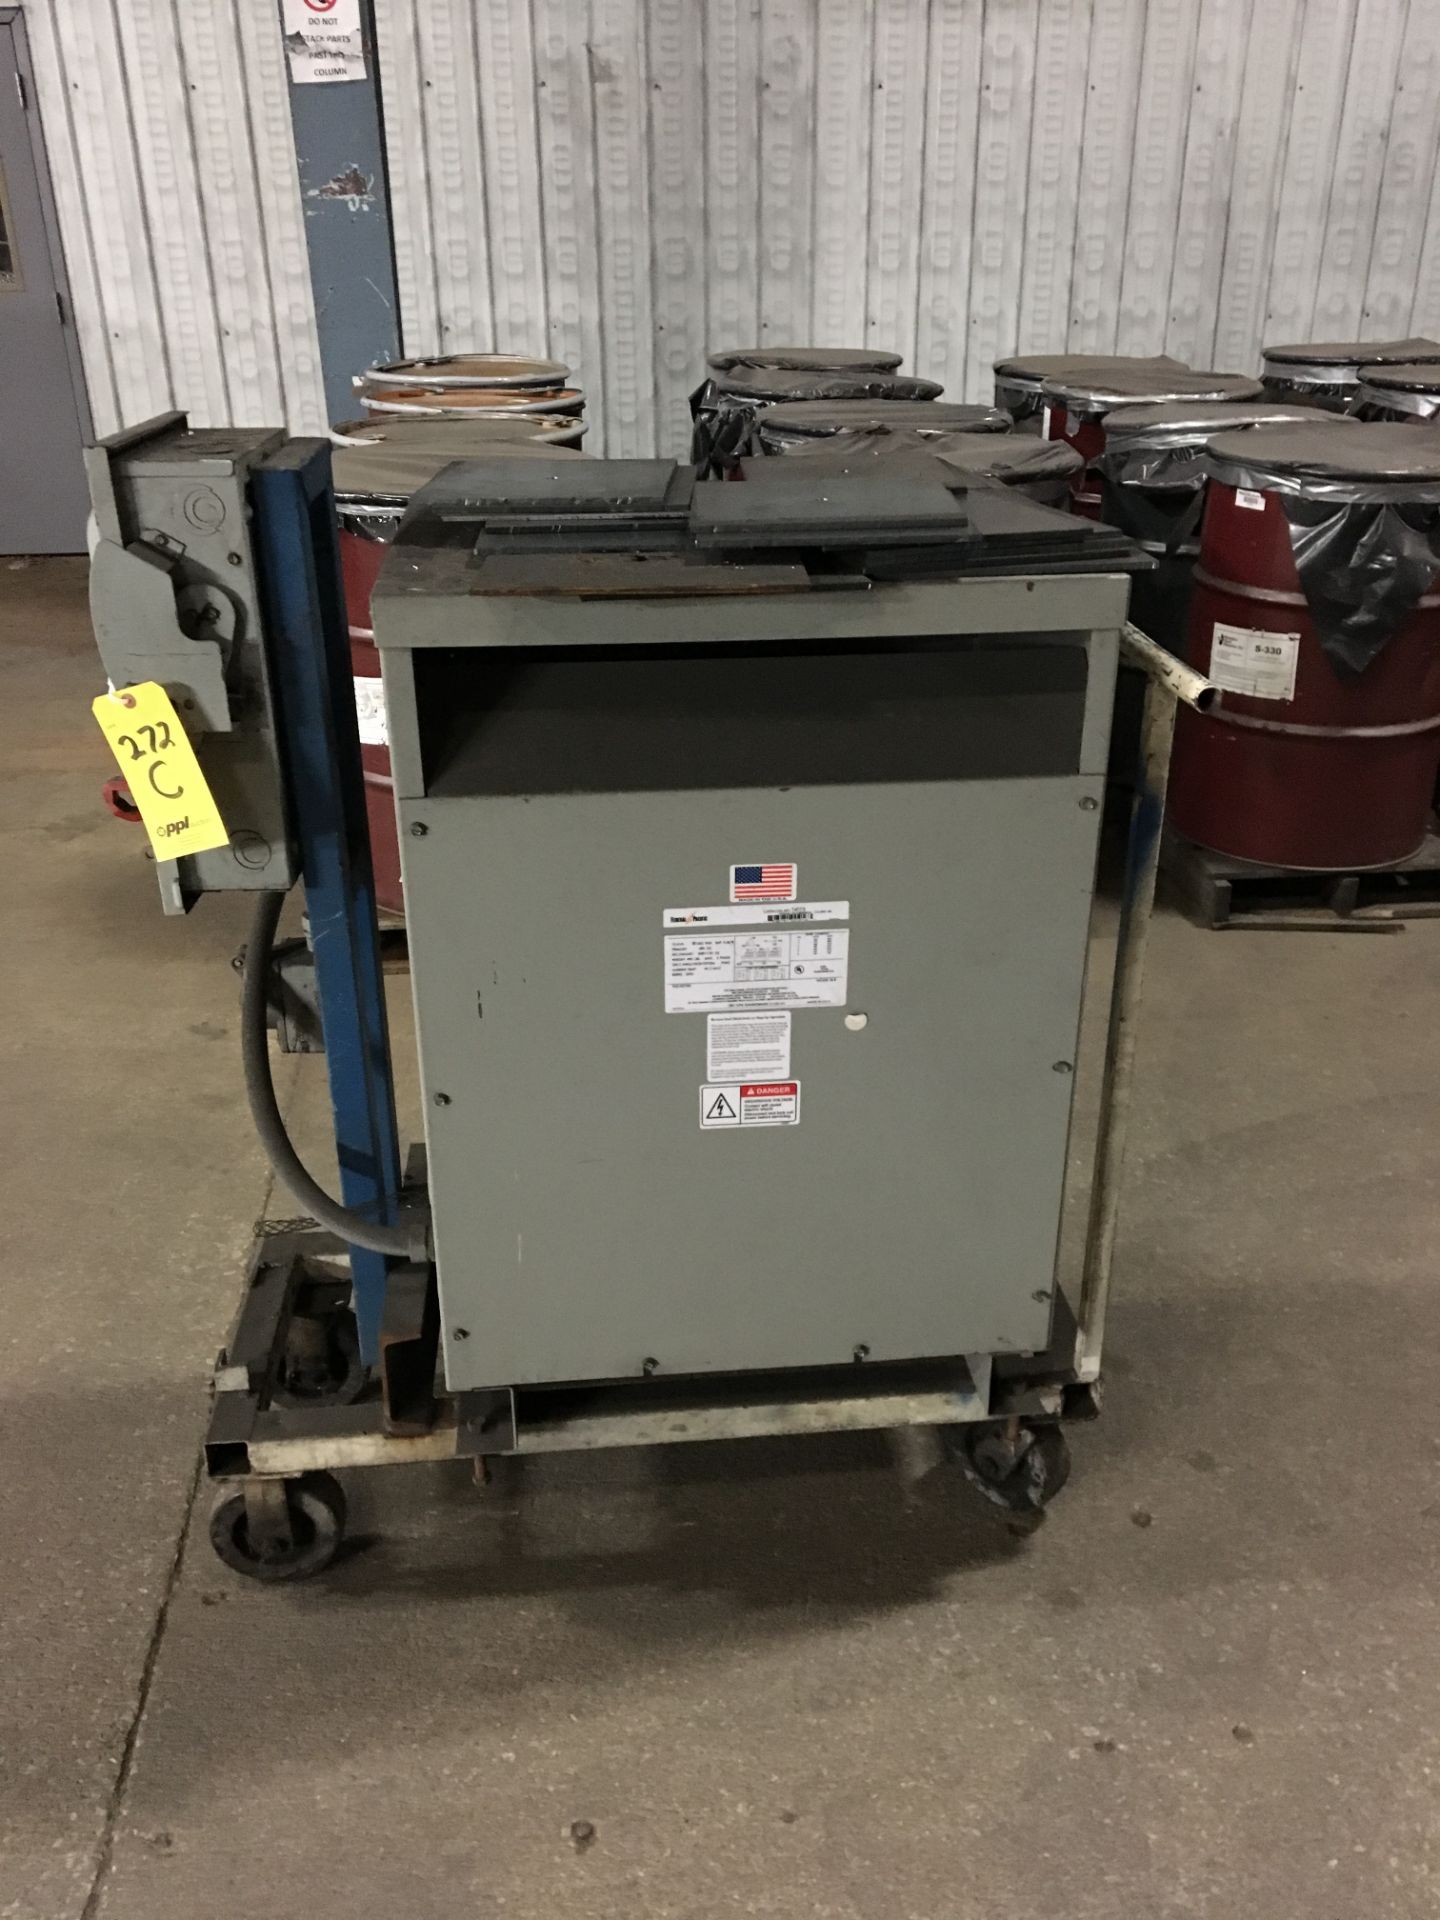 1 Federal Pacific 75KVA transformer on cart with control box and outlet